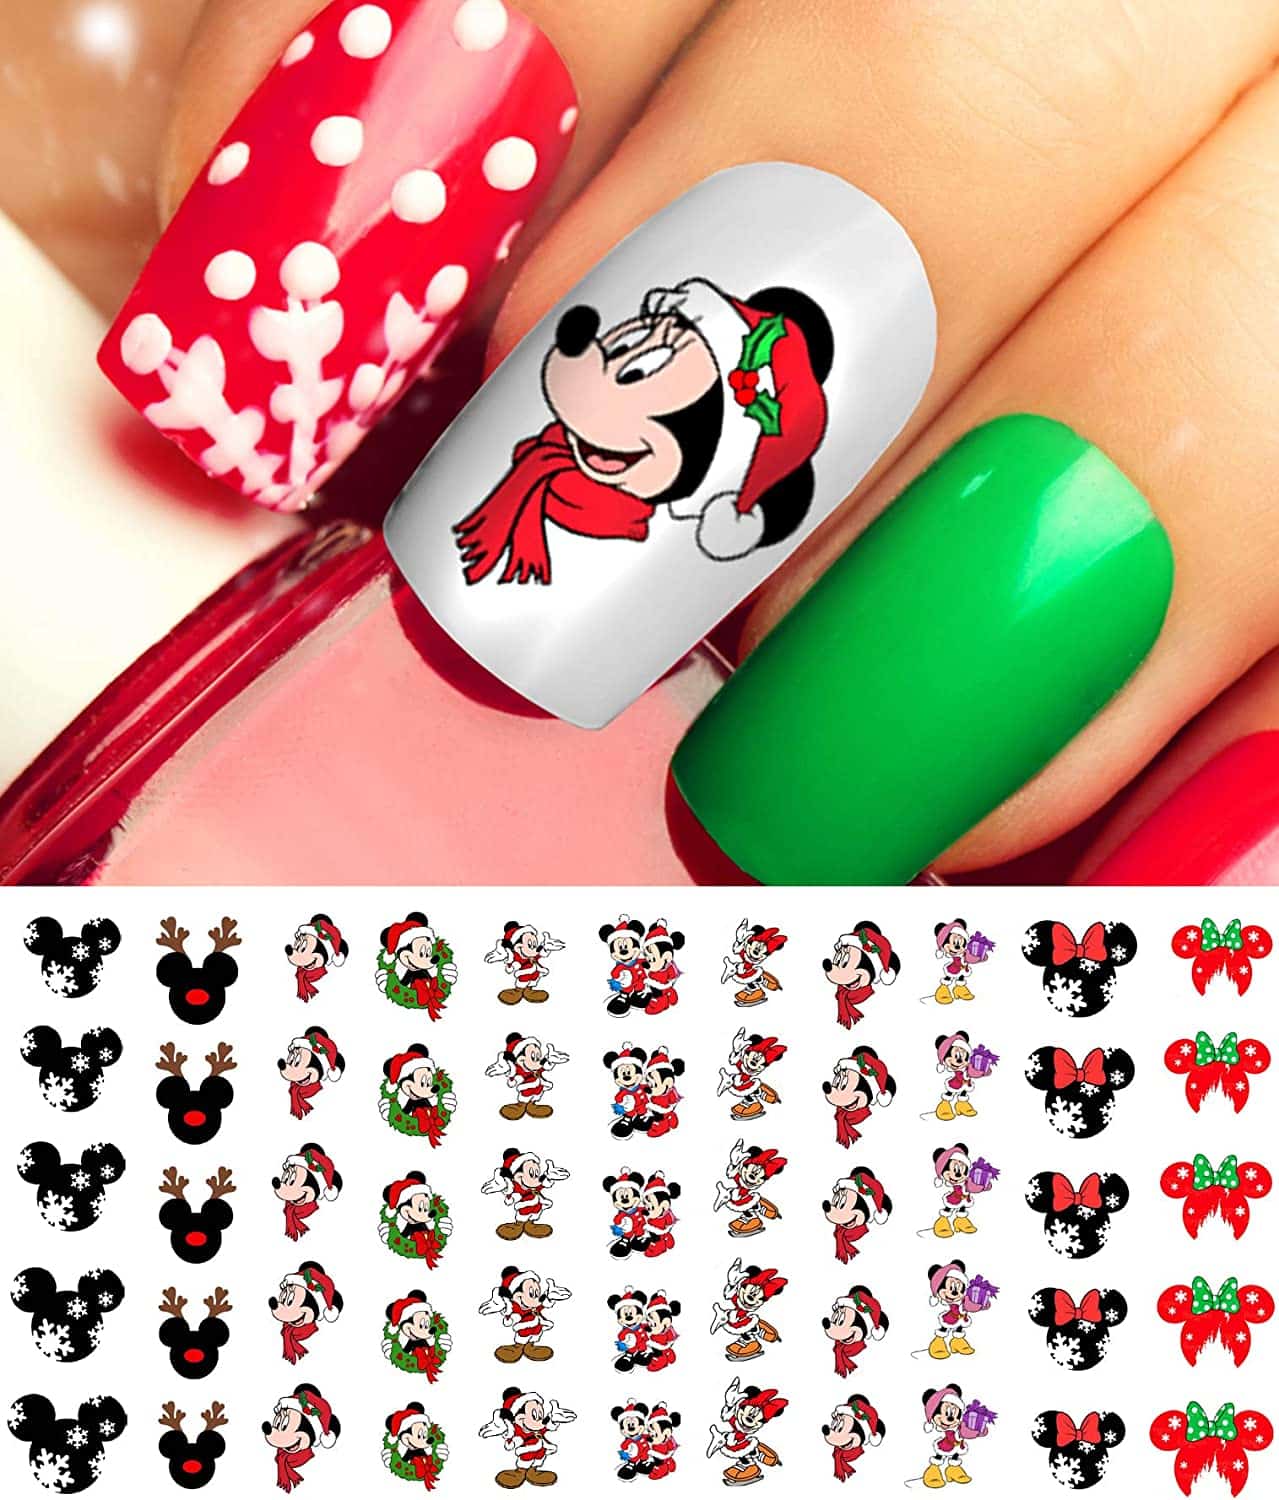 Mickey Mouse & Minne Mouse Christmas - Nail Art Decals Set #2 - Moon Sugar  Decals